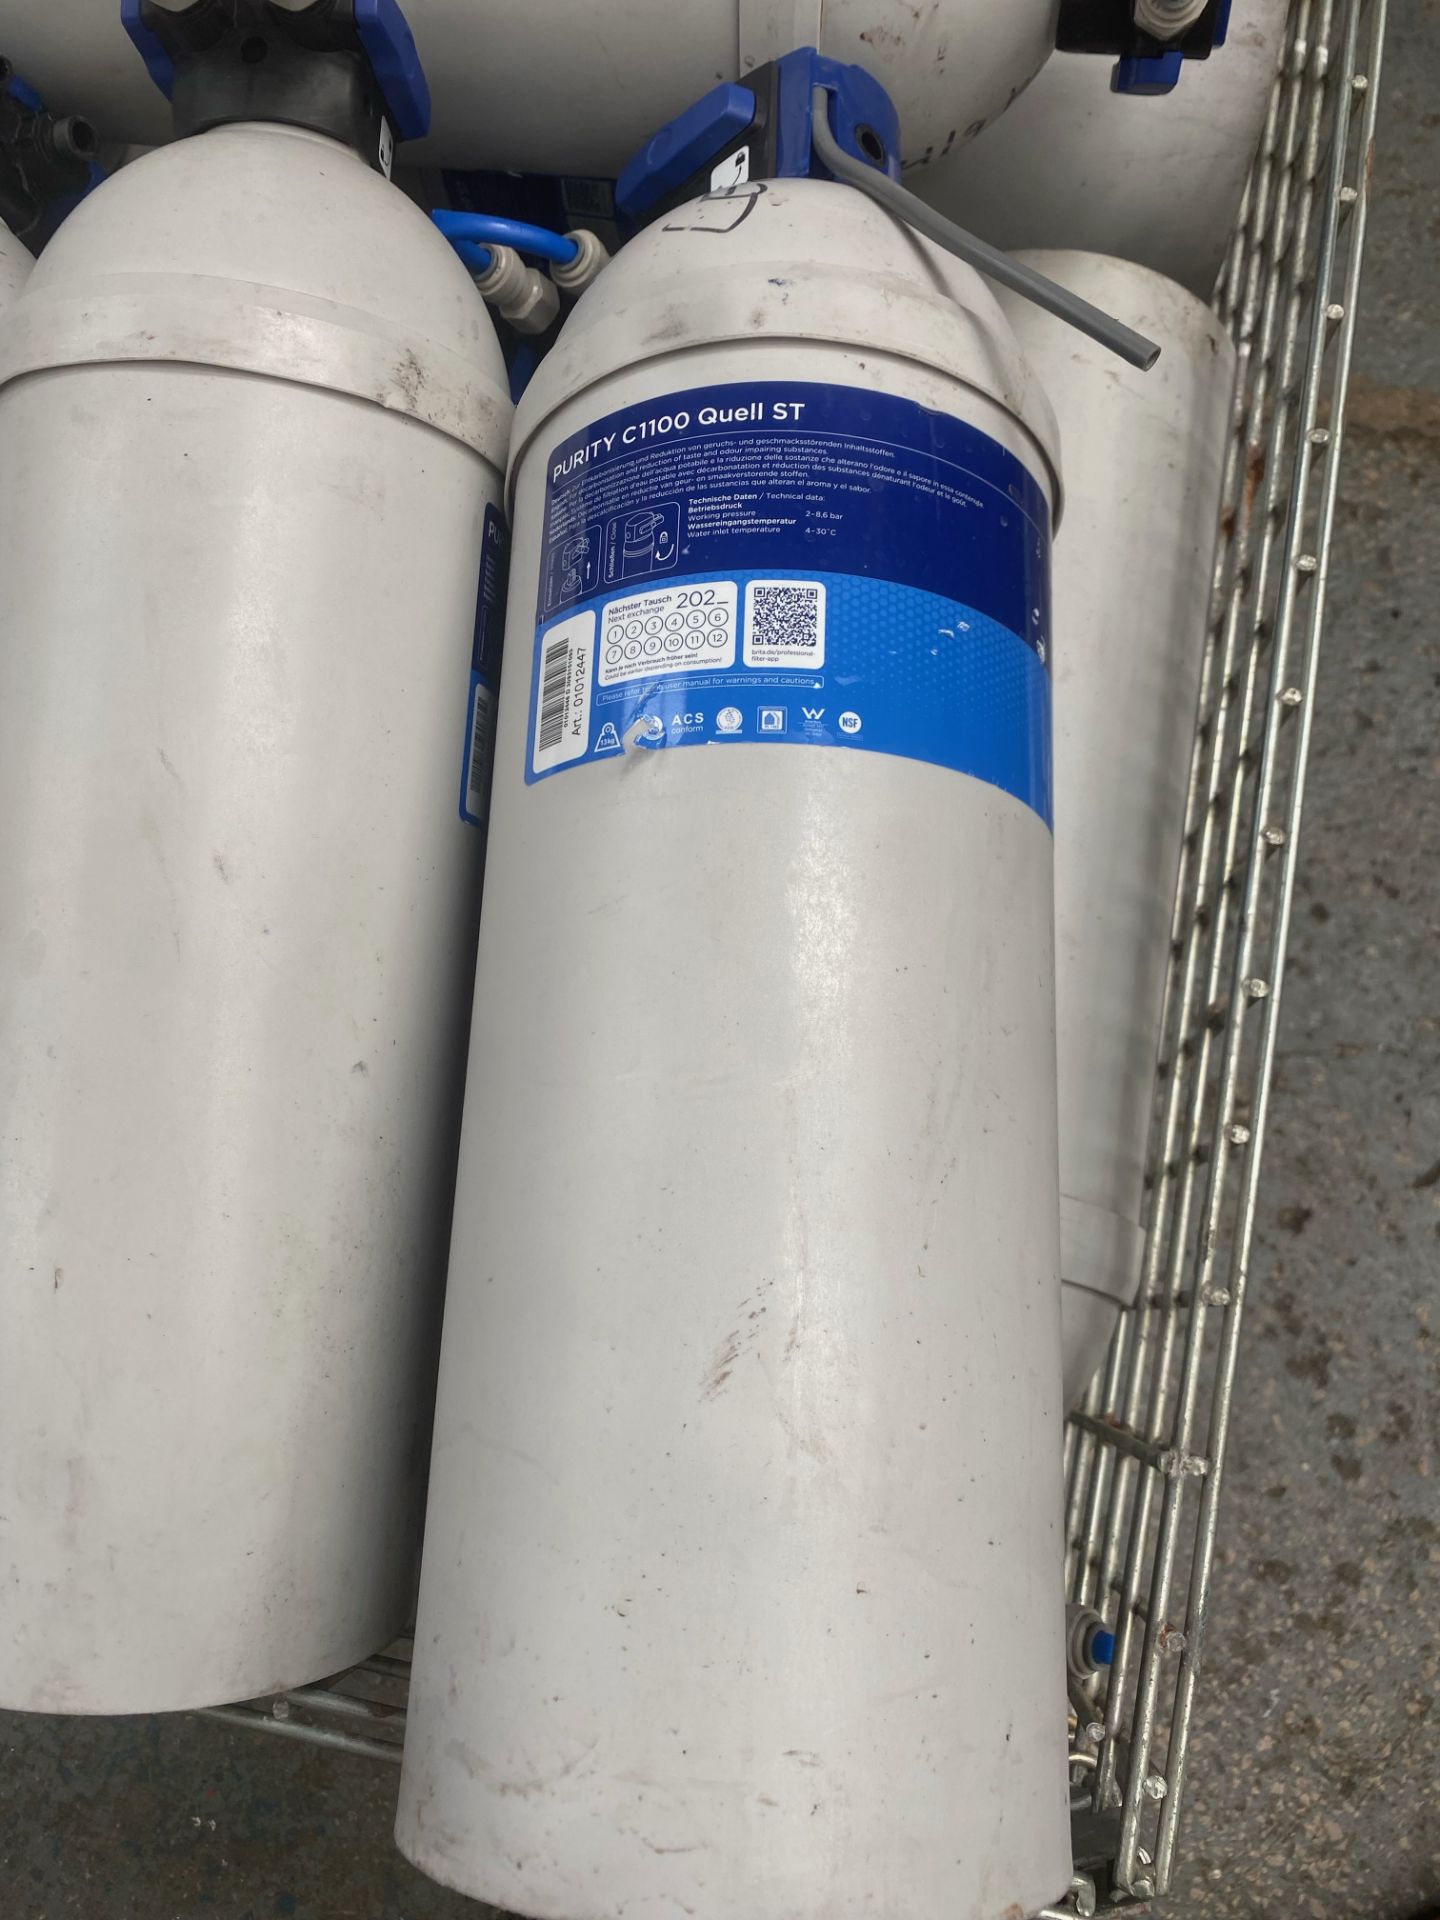 PALLET OF APROX 50 USED BRITA WATER FILTERS C1100 RRP £11500 - Image 2 of 6